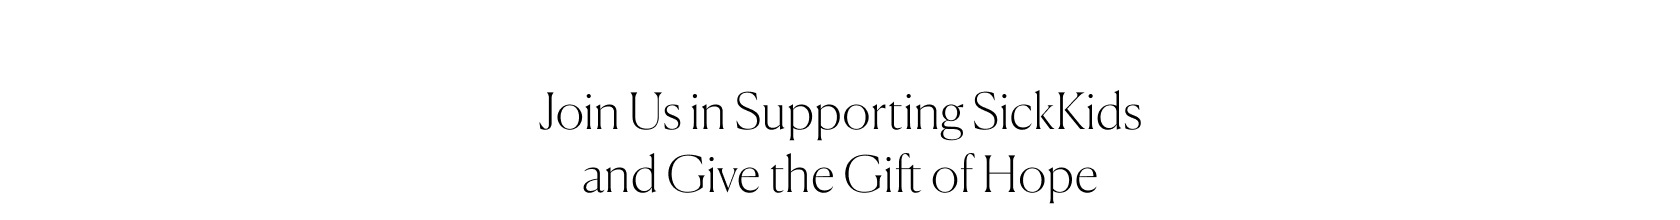 Join us in supporting SickKids and give the gift of hope